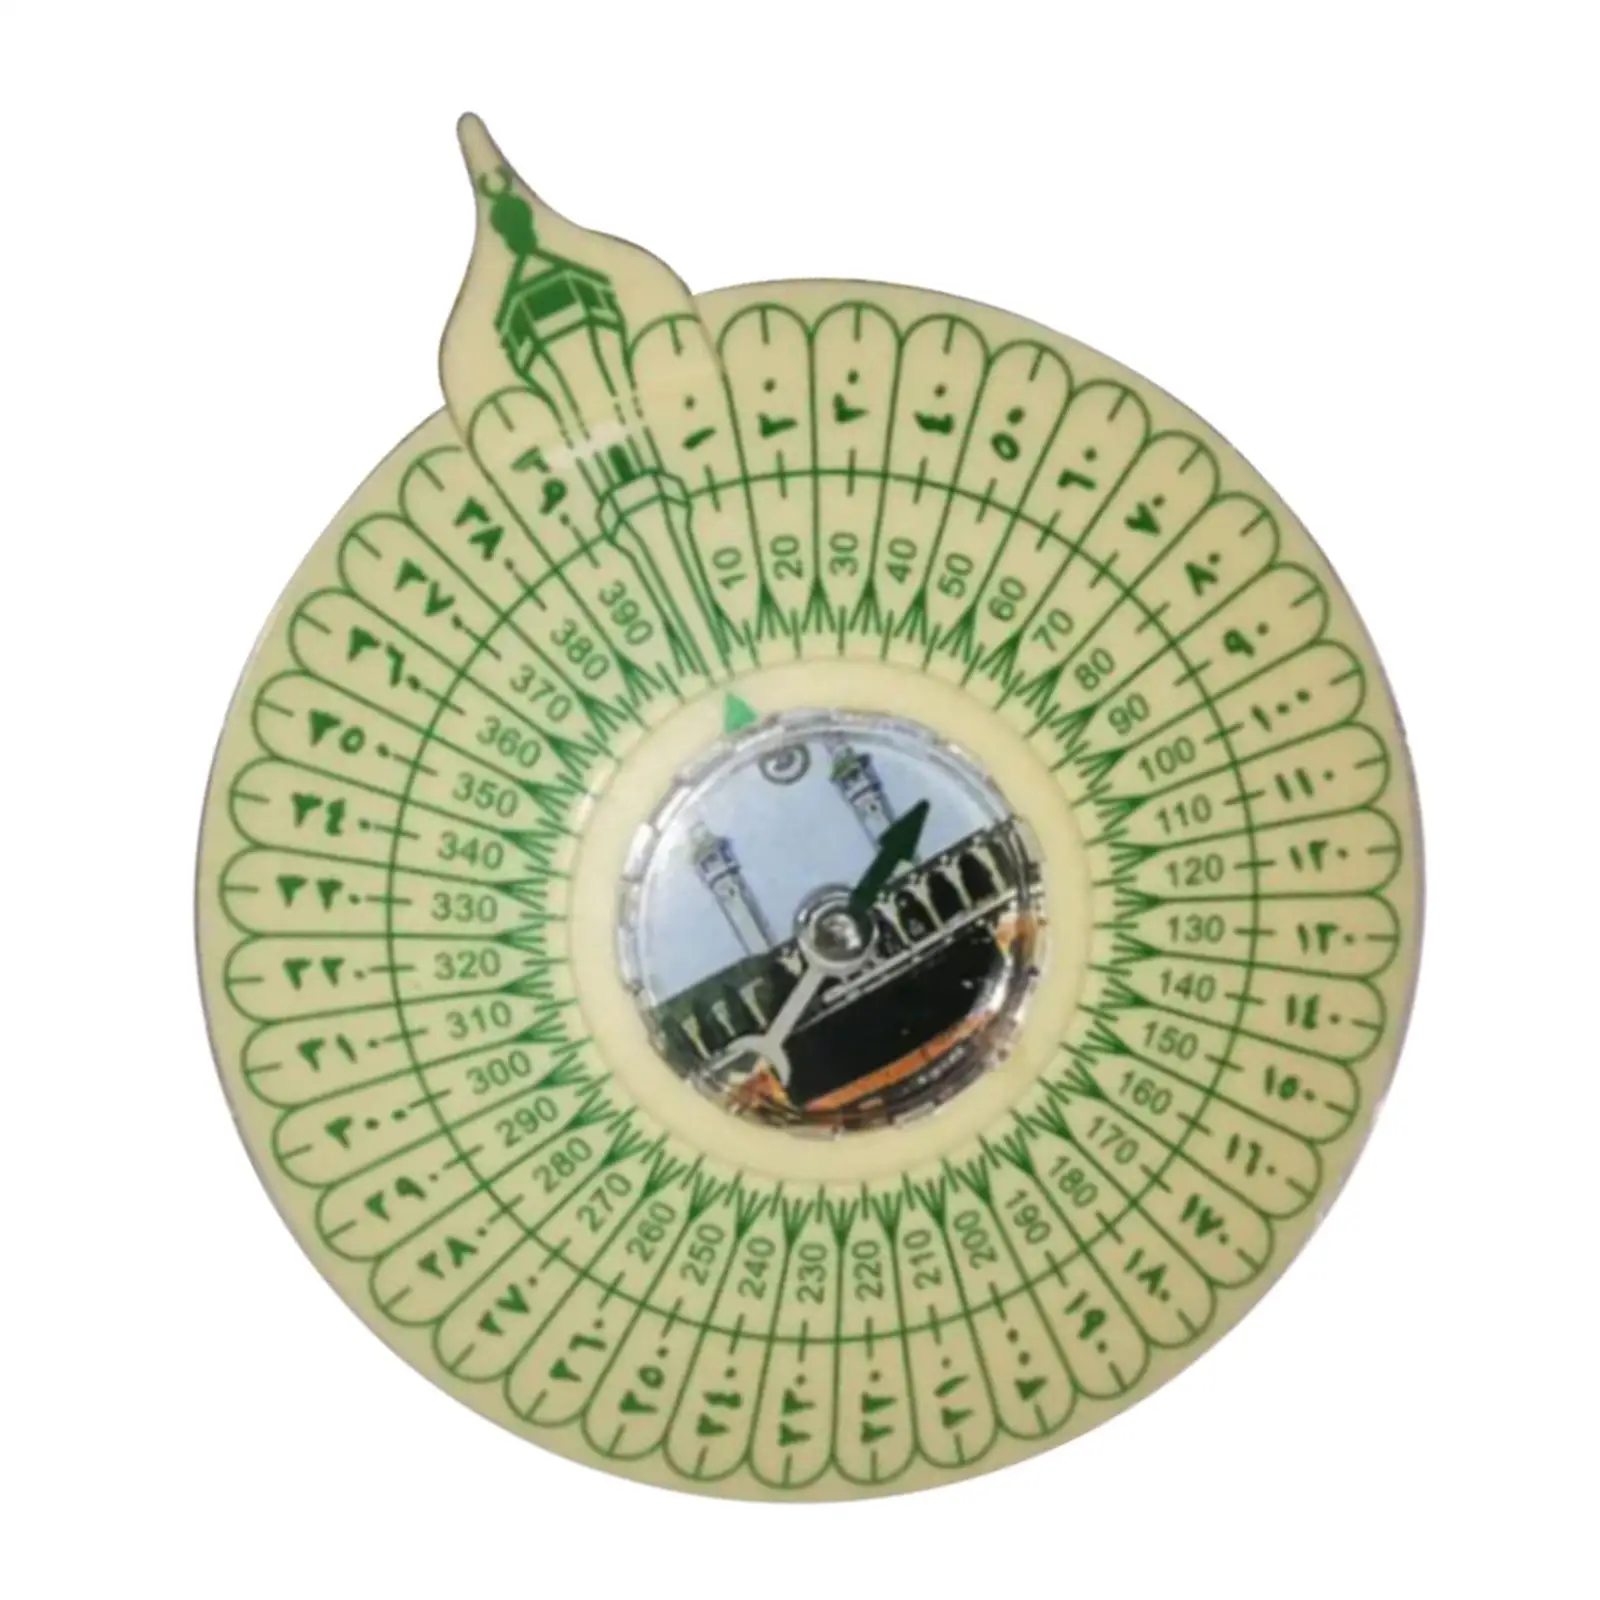 Muslim Small Makkah Qibla Find for Backpacking Gadget Gift